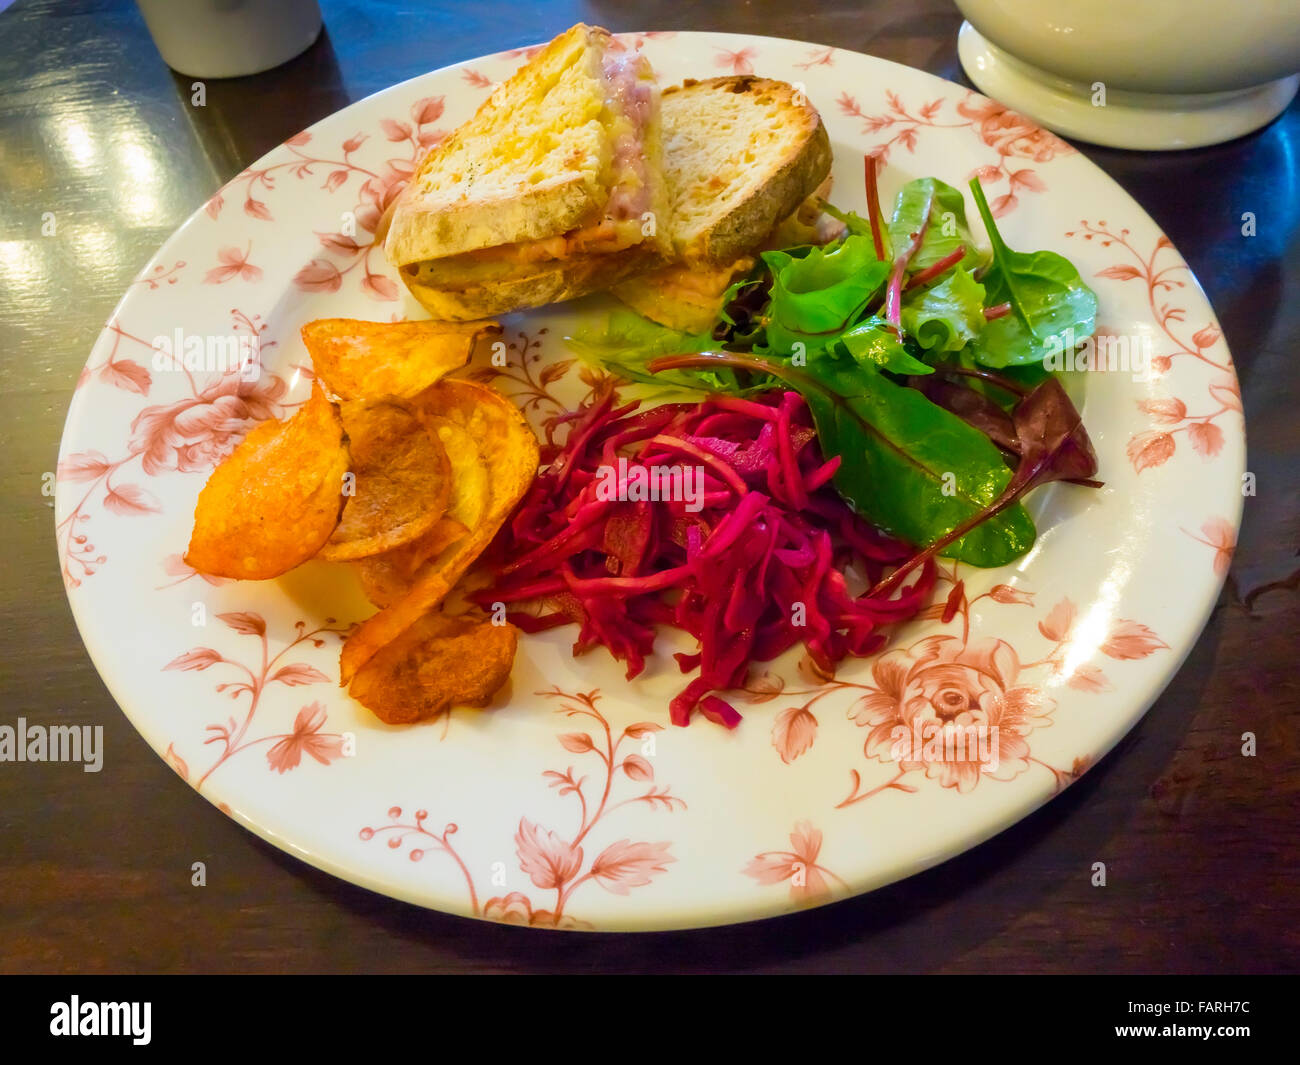 Toasted Ham and Cheese Sandwich with salad red cabbage and crisps on a  pink plate Stock Photo